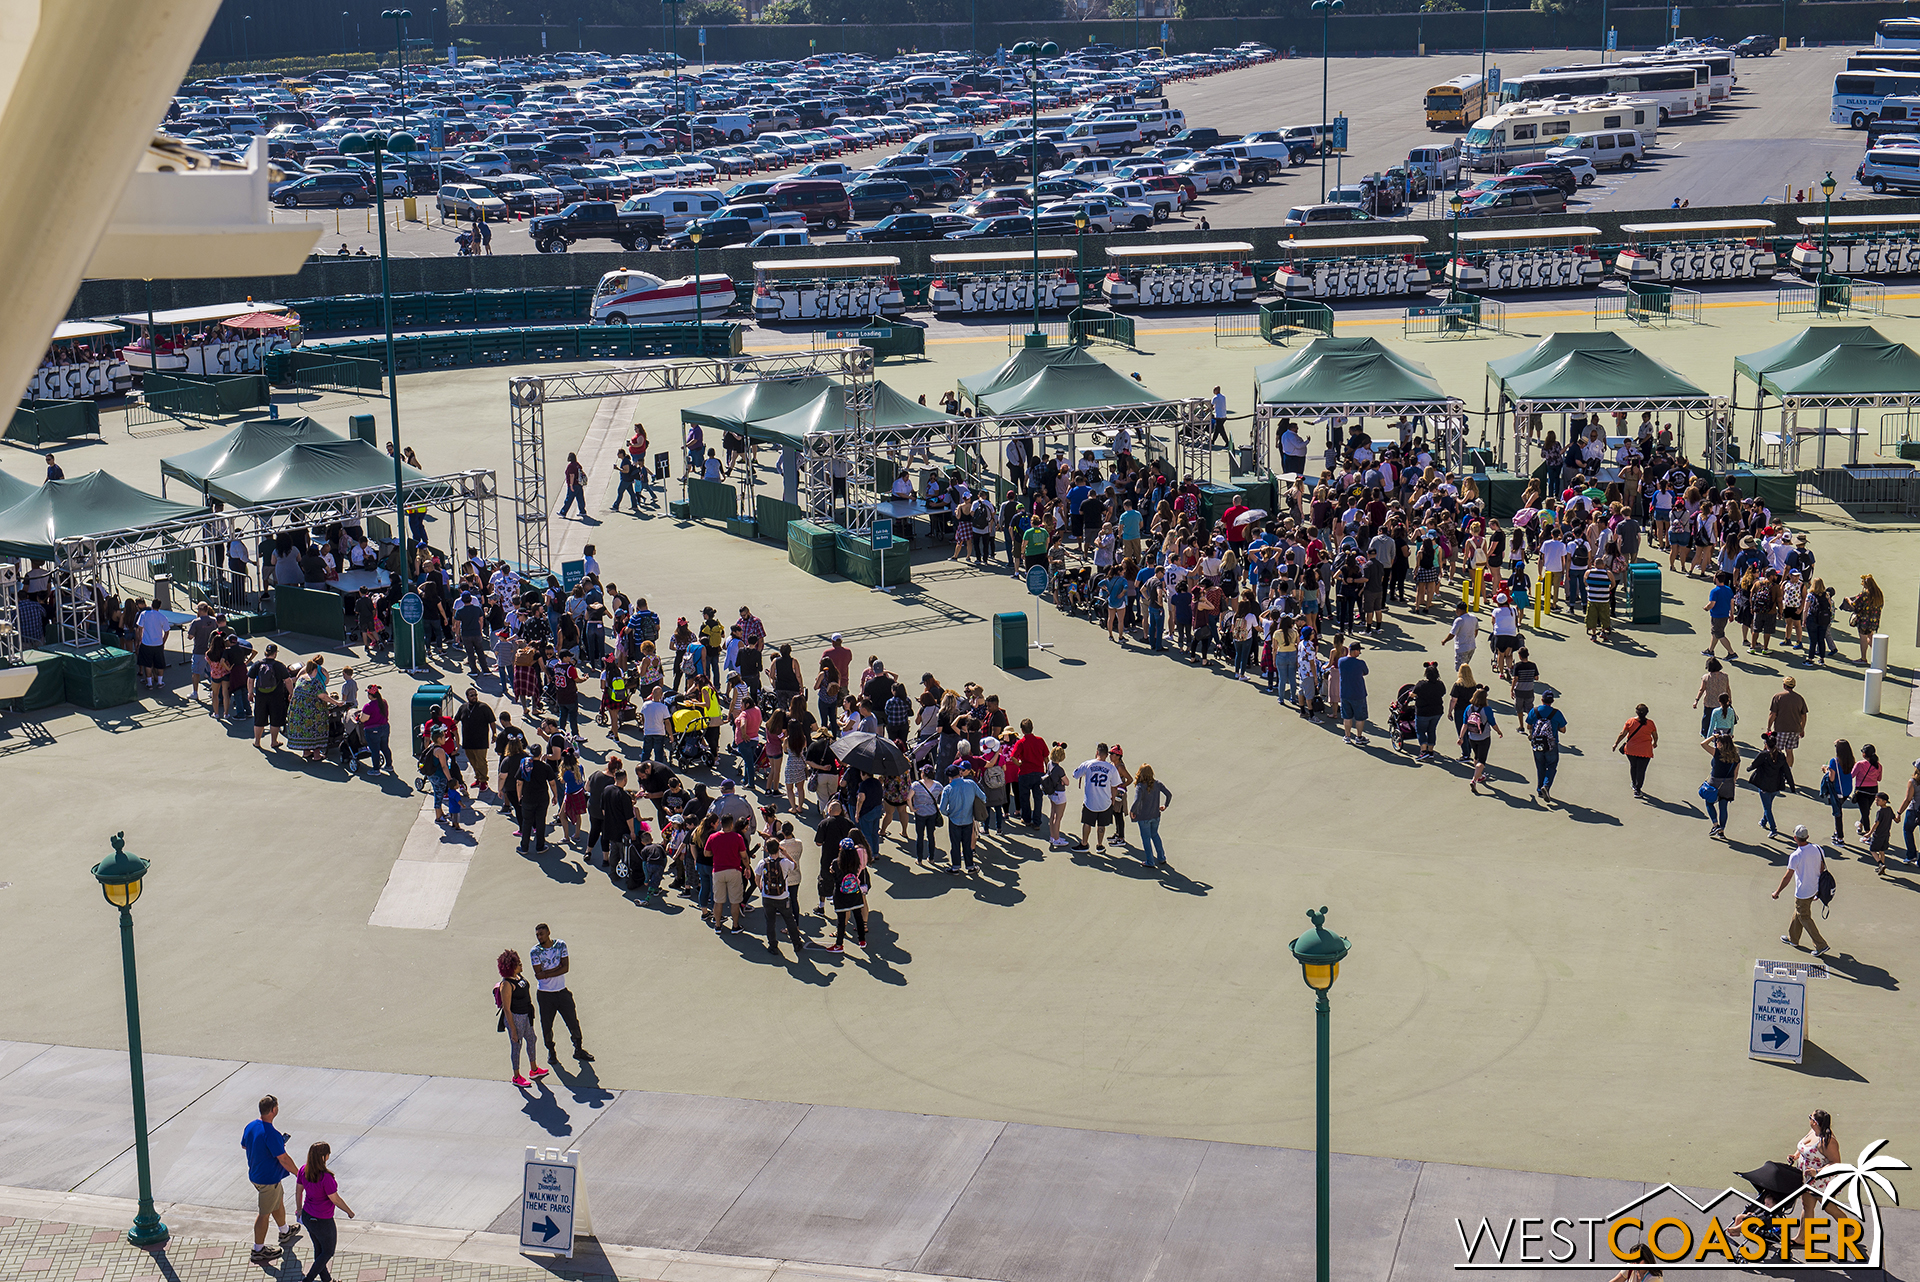  On Sunday, swelling afternoon crowds provided a glimpse of what the future of getting to Disneyland might look like, as long lines plagued the Mickey and Friends security area.&nbsp; I've mentioned this before, but this is primarily due to the bottl